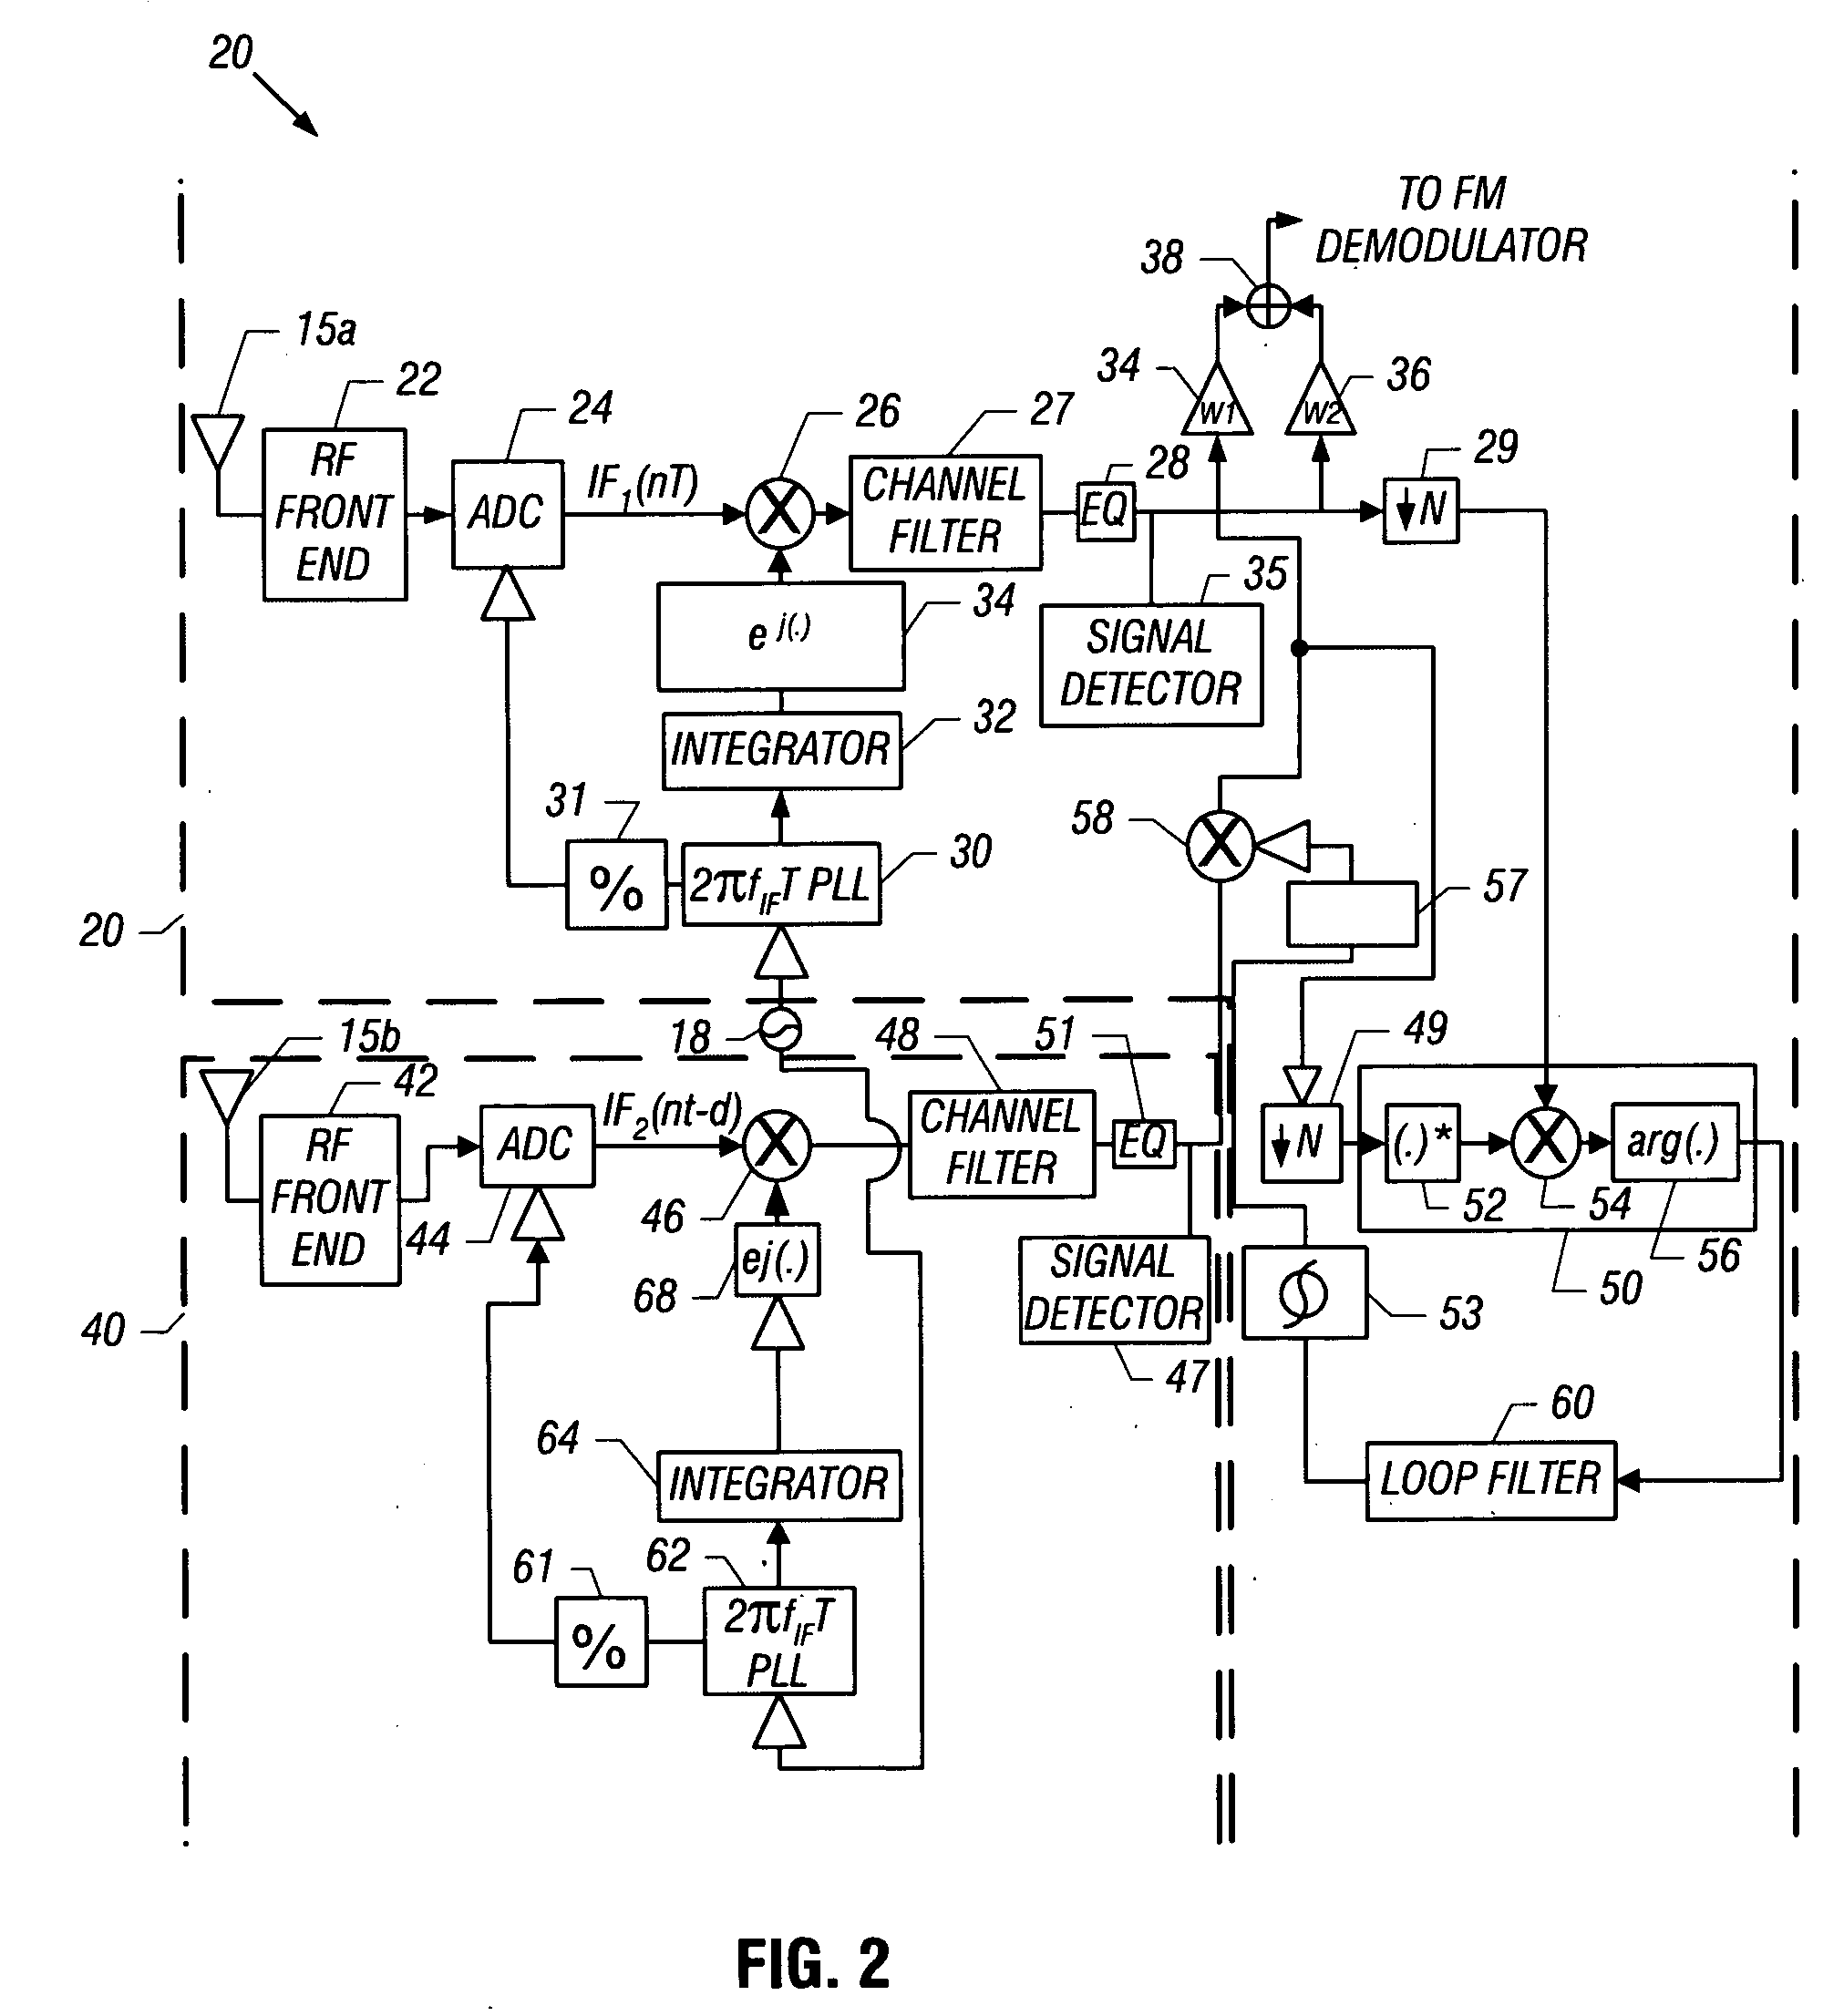 Combining multiple frequency modulation (FM) signals in a receiver